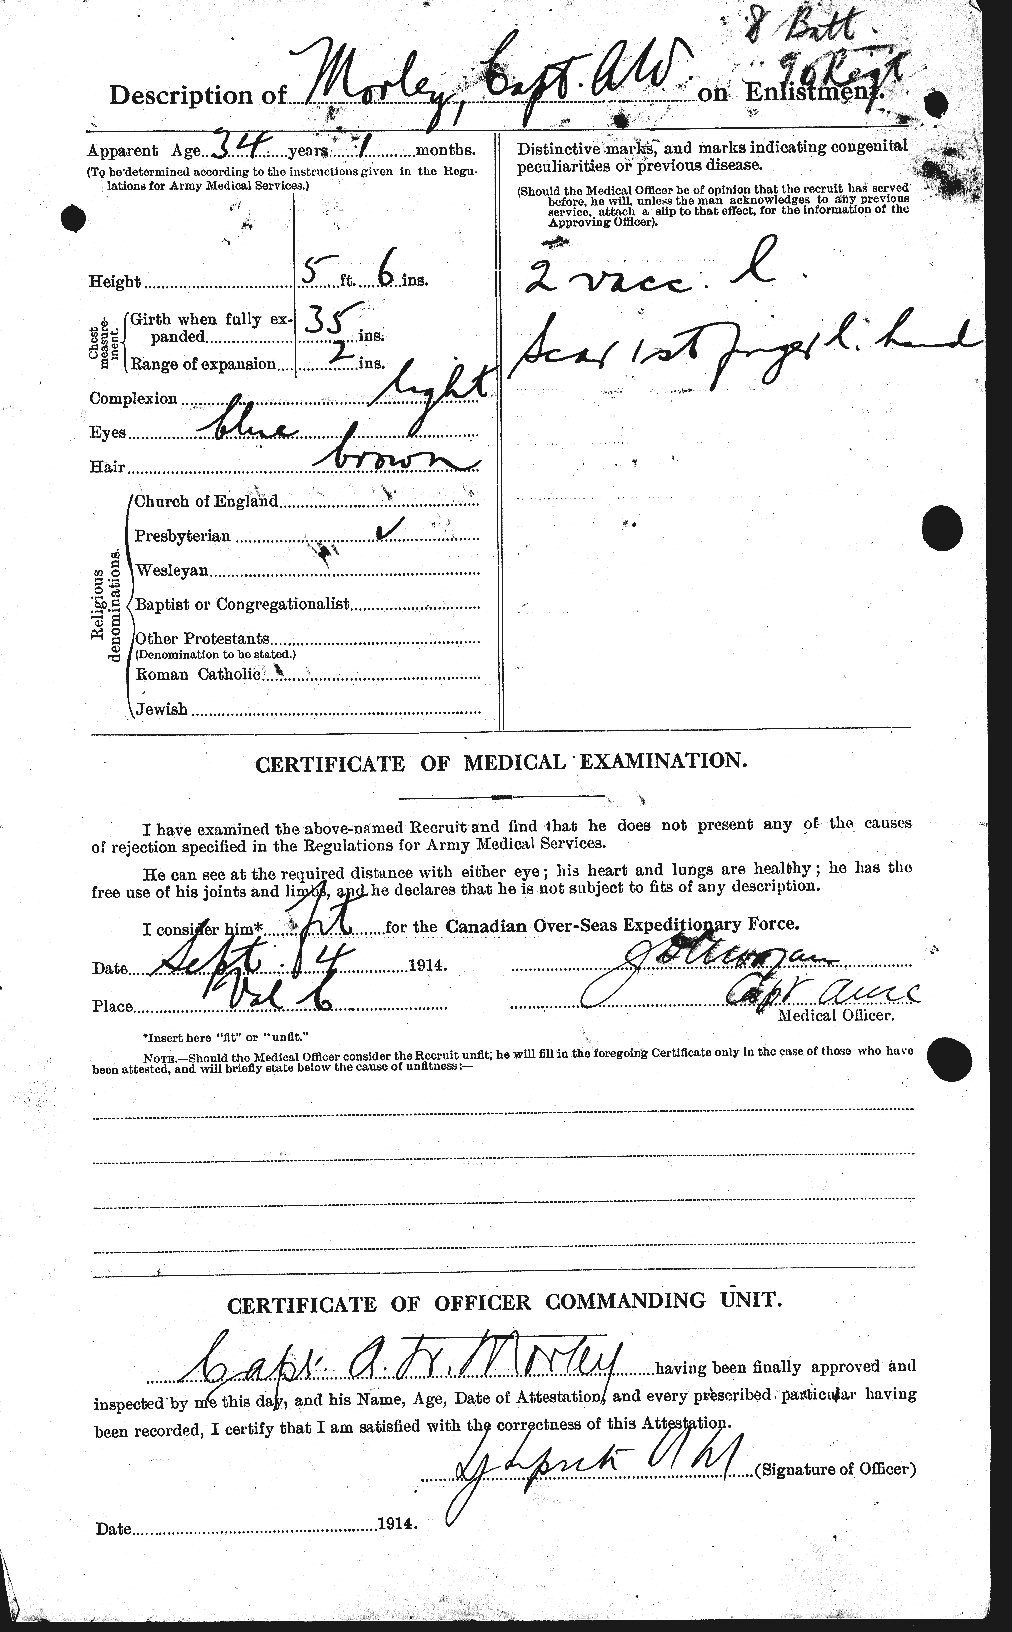 Personnel Records of the First World War - CEF 508030b